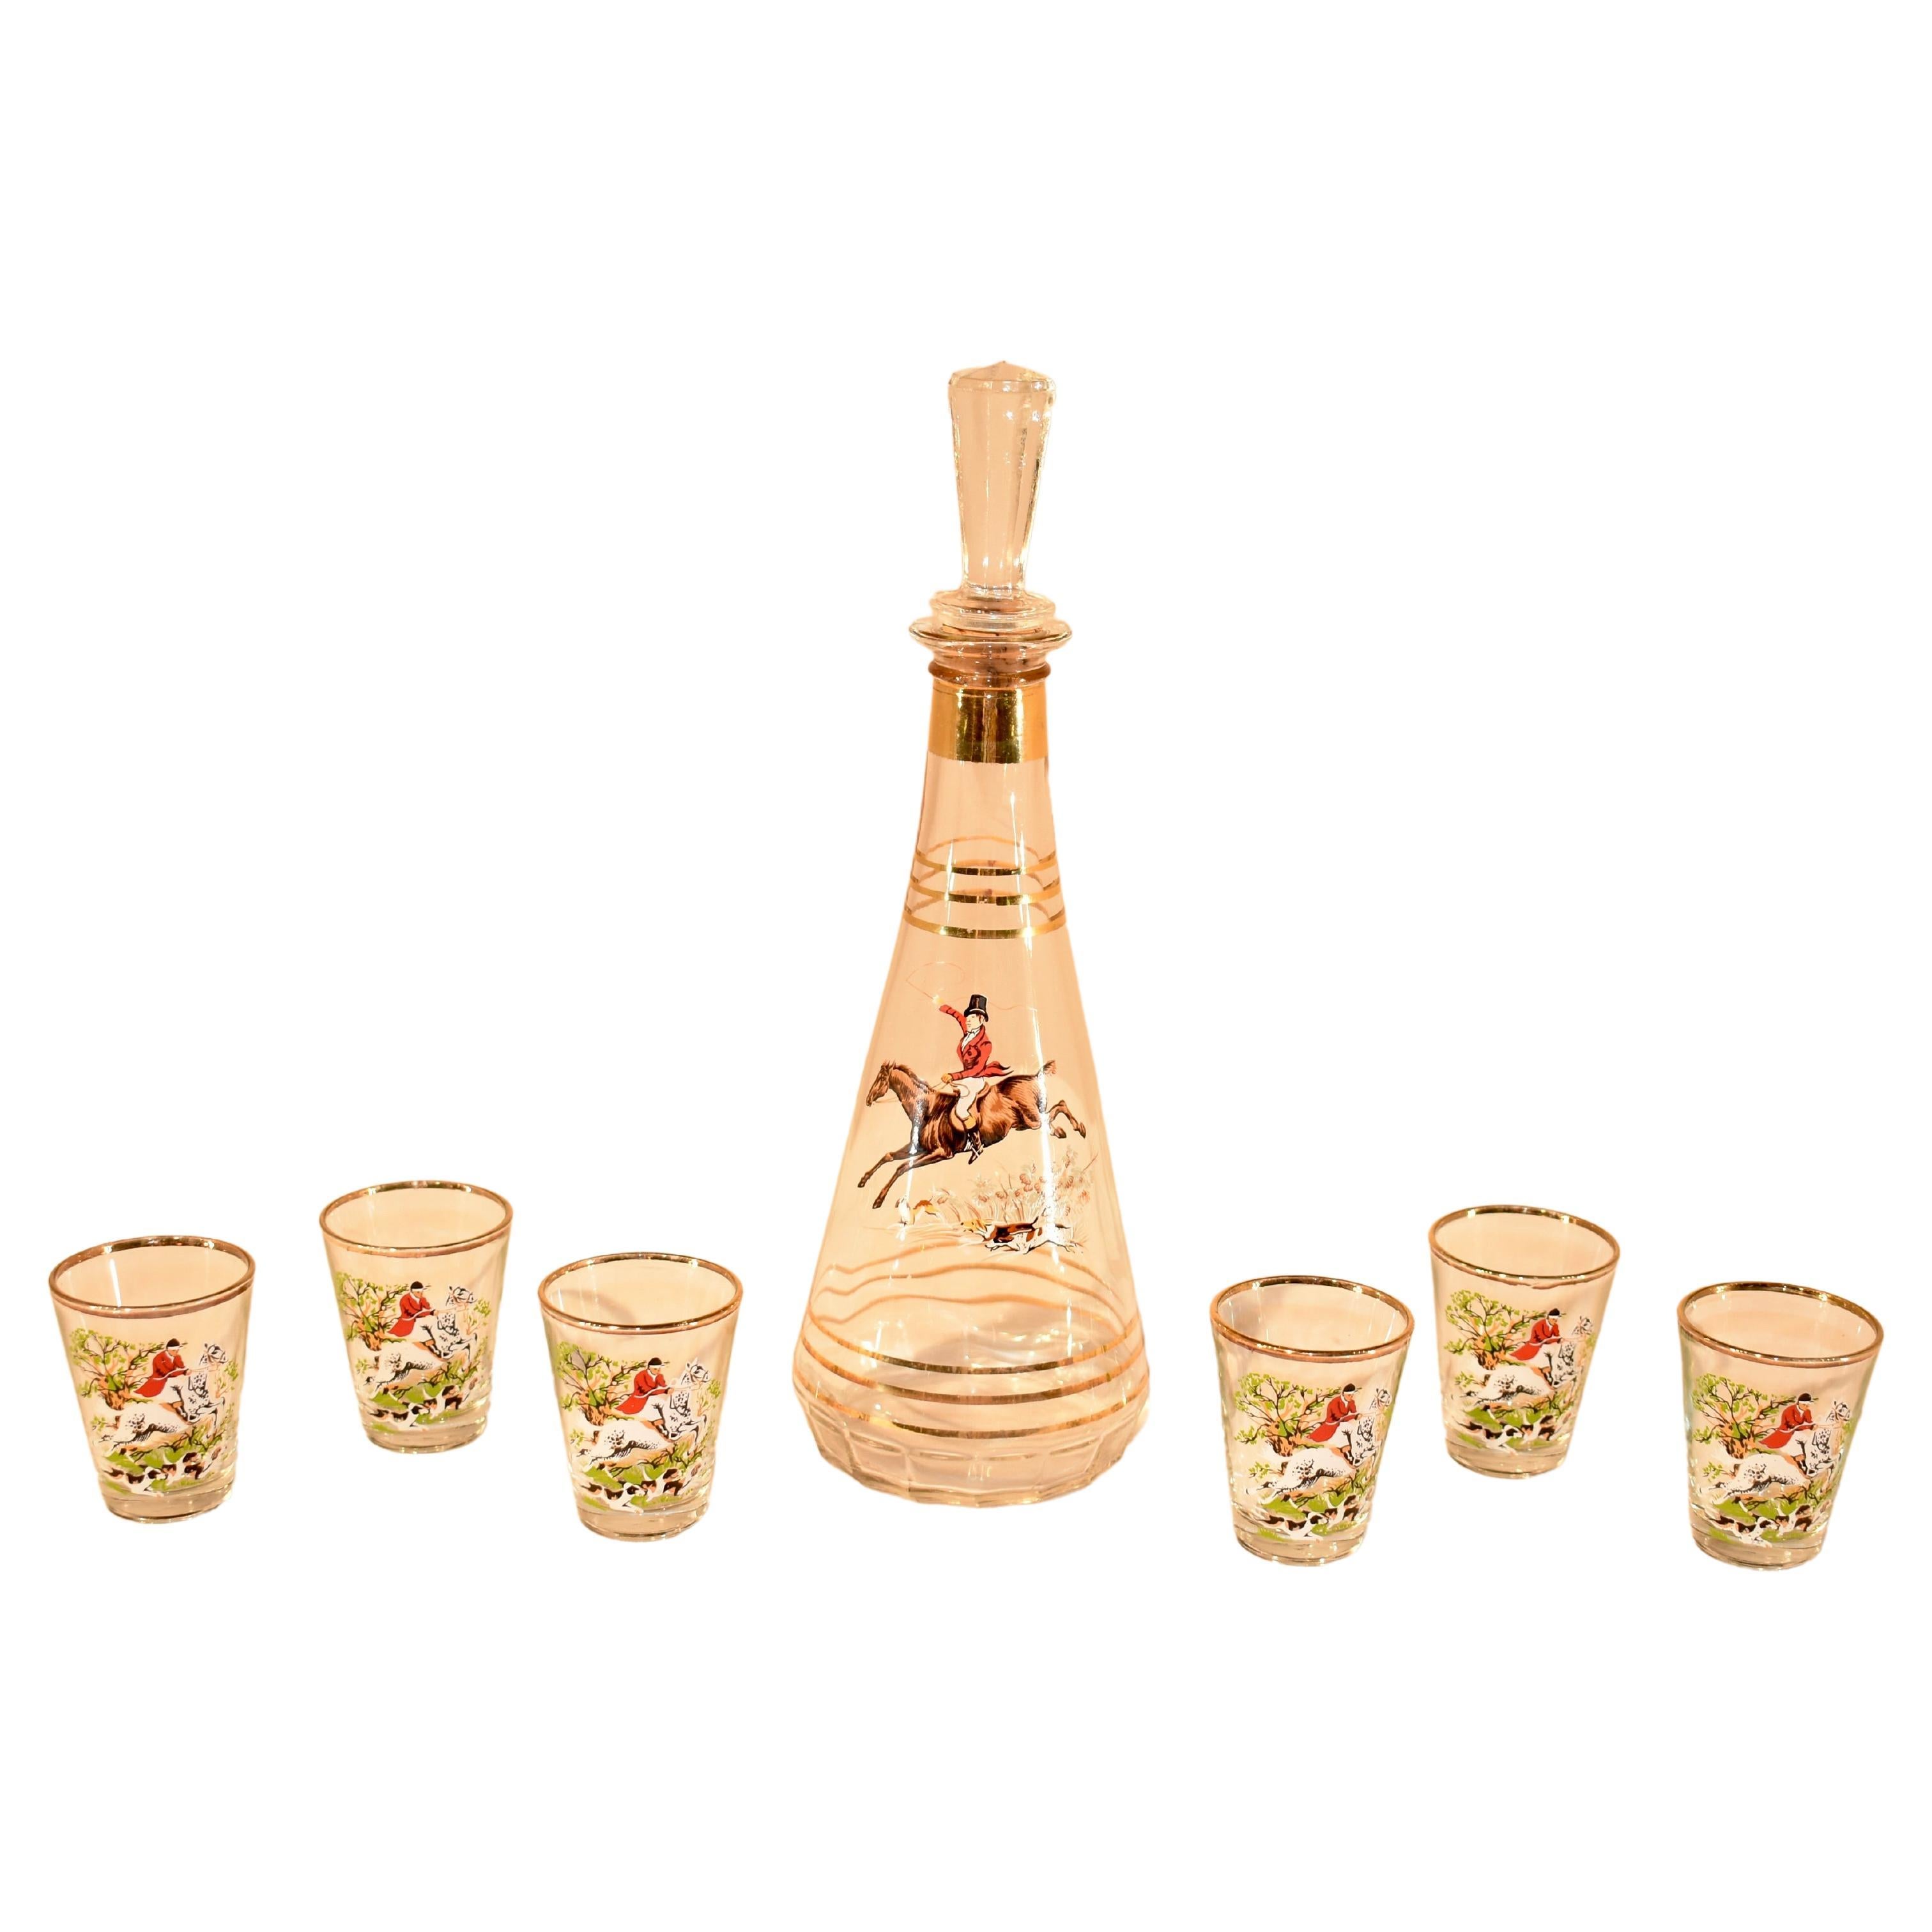 Gorgeous set of mid-century barware from England. The cordial set includes a bottle, which measures 3.5 inches x 10.5 inches and six small glasses which measure 1.88 inches x 2.25 inches. The set has the original box and is hand painted with hunting